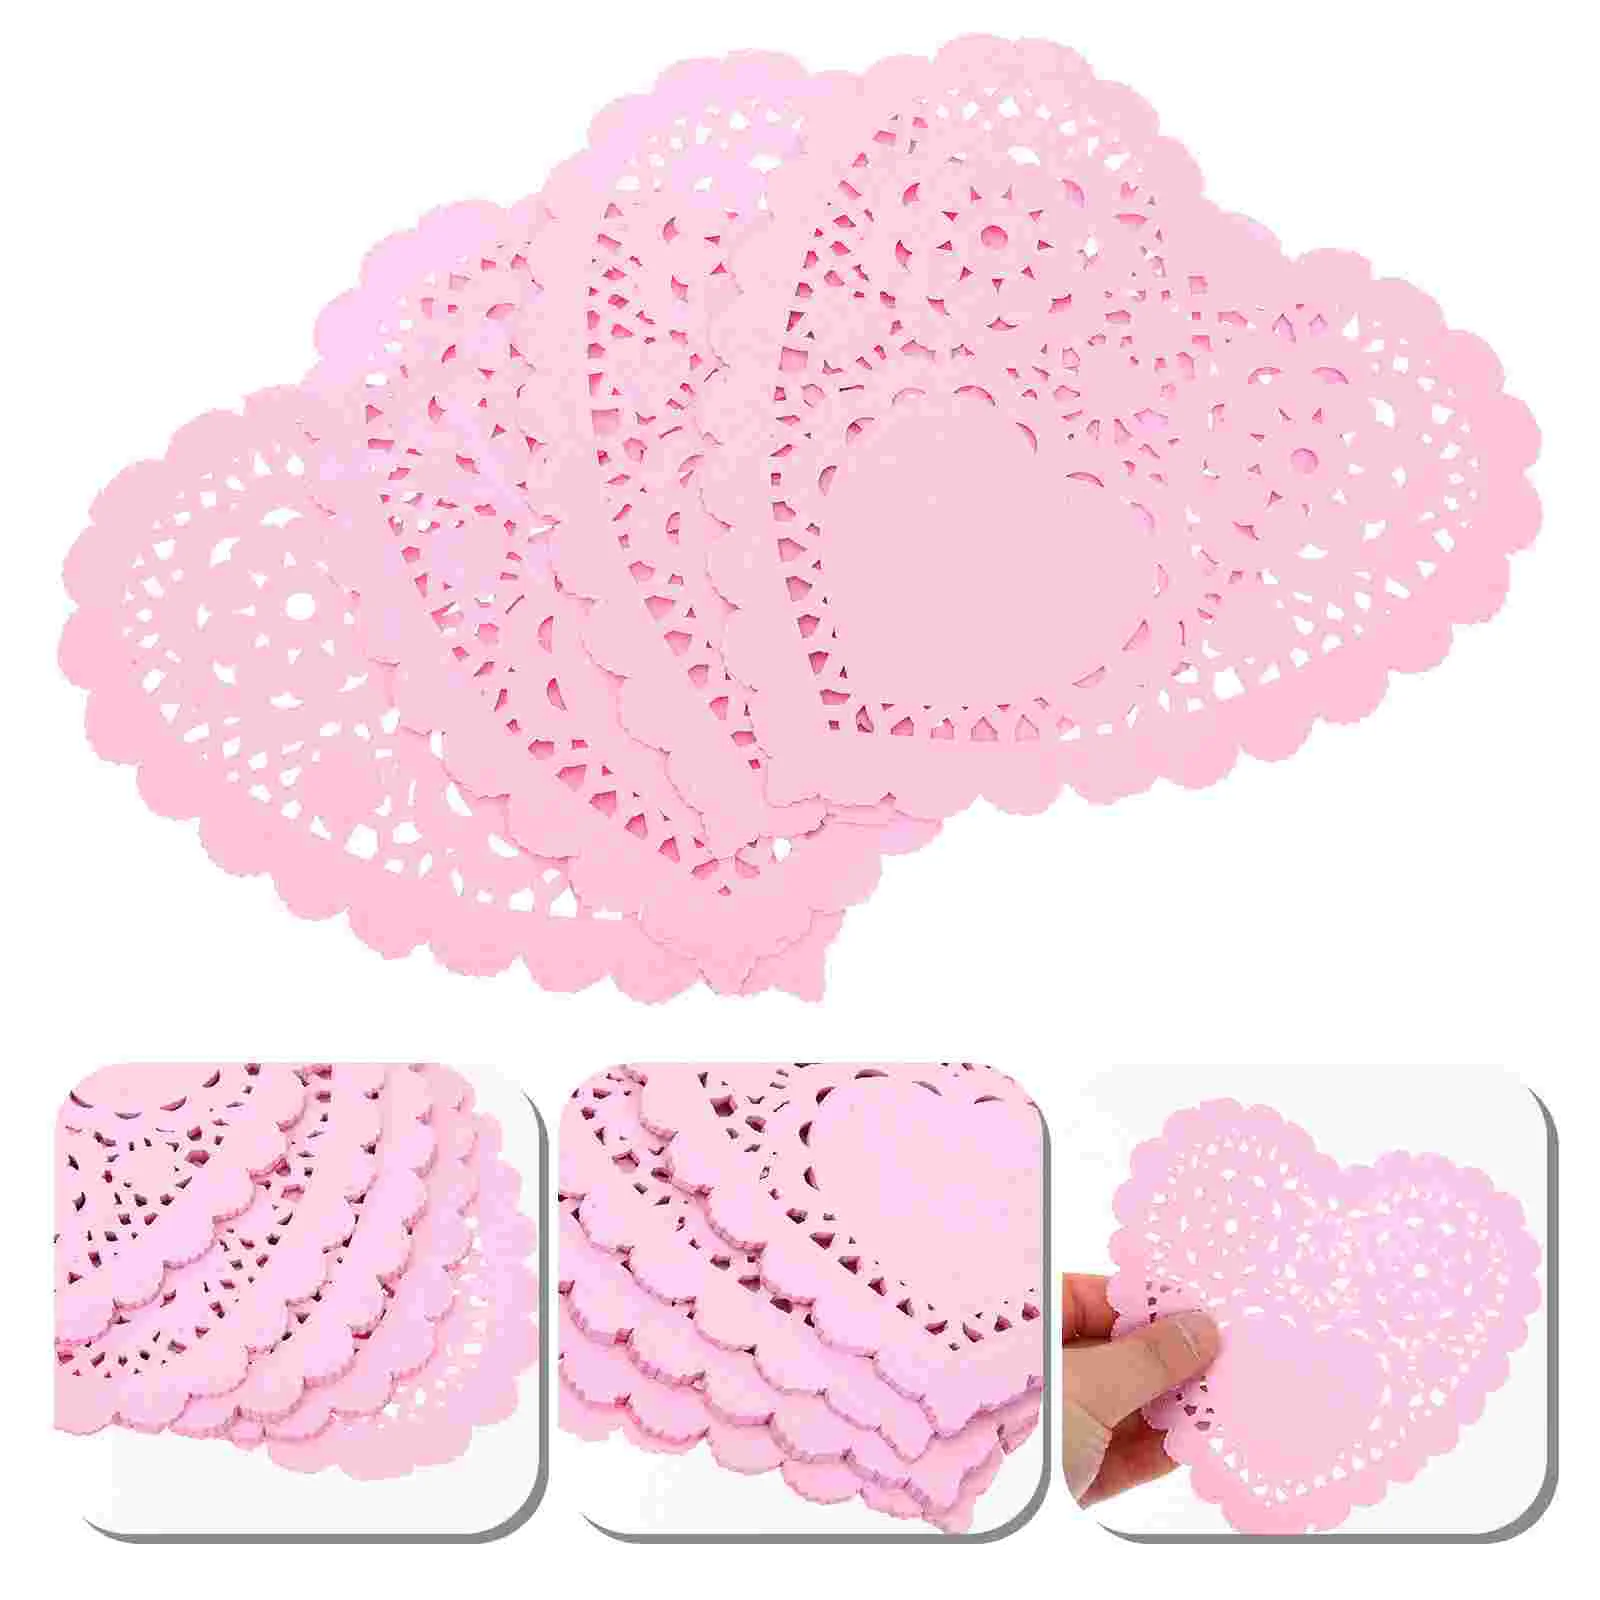 

100 Pcs Placemat Heart Paper Doilies Sandwich Coaster Holder Modern Coasters for Drinks Crafts